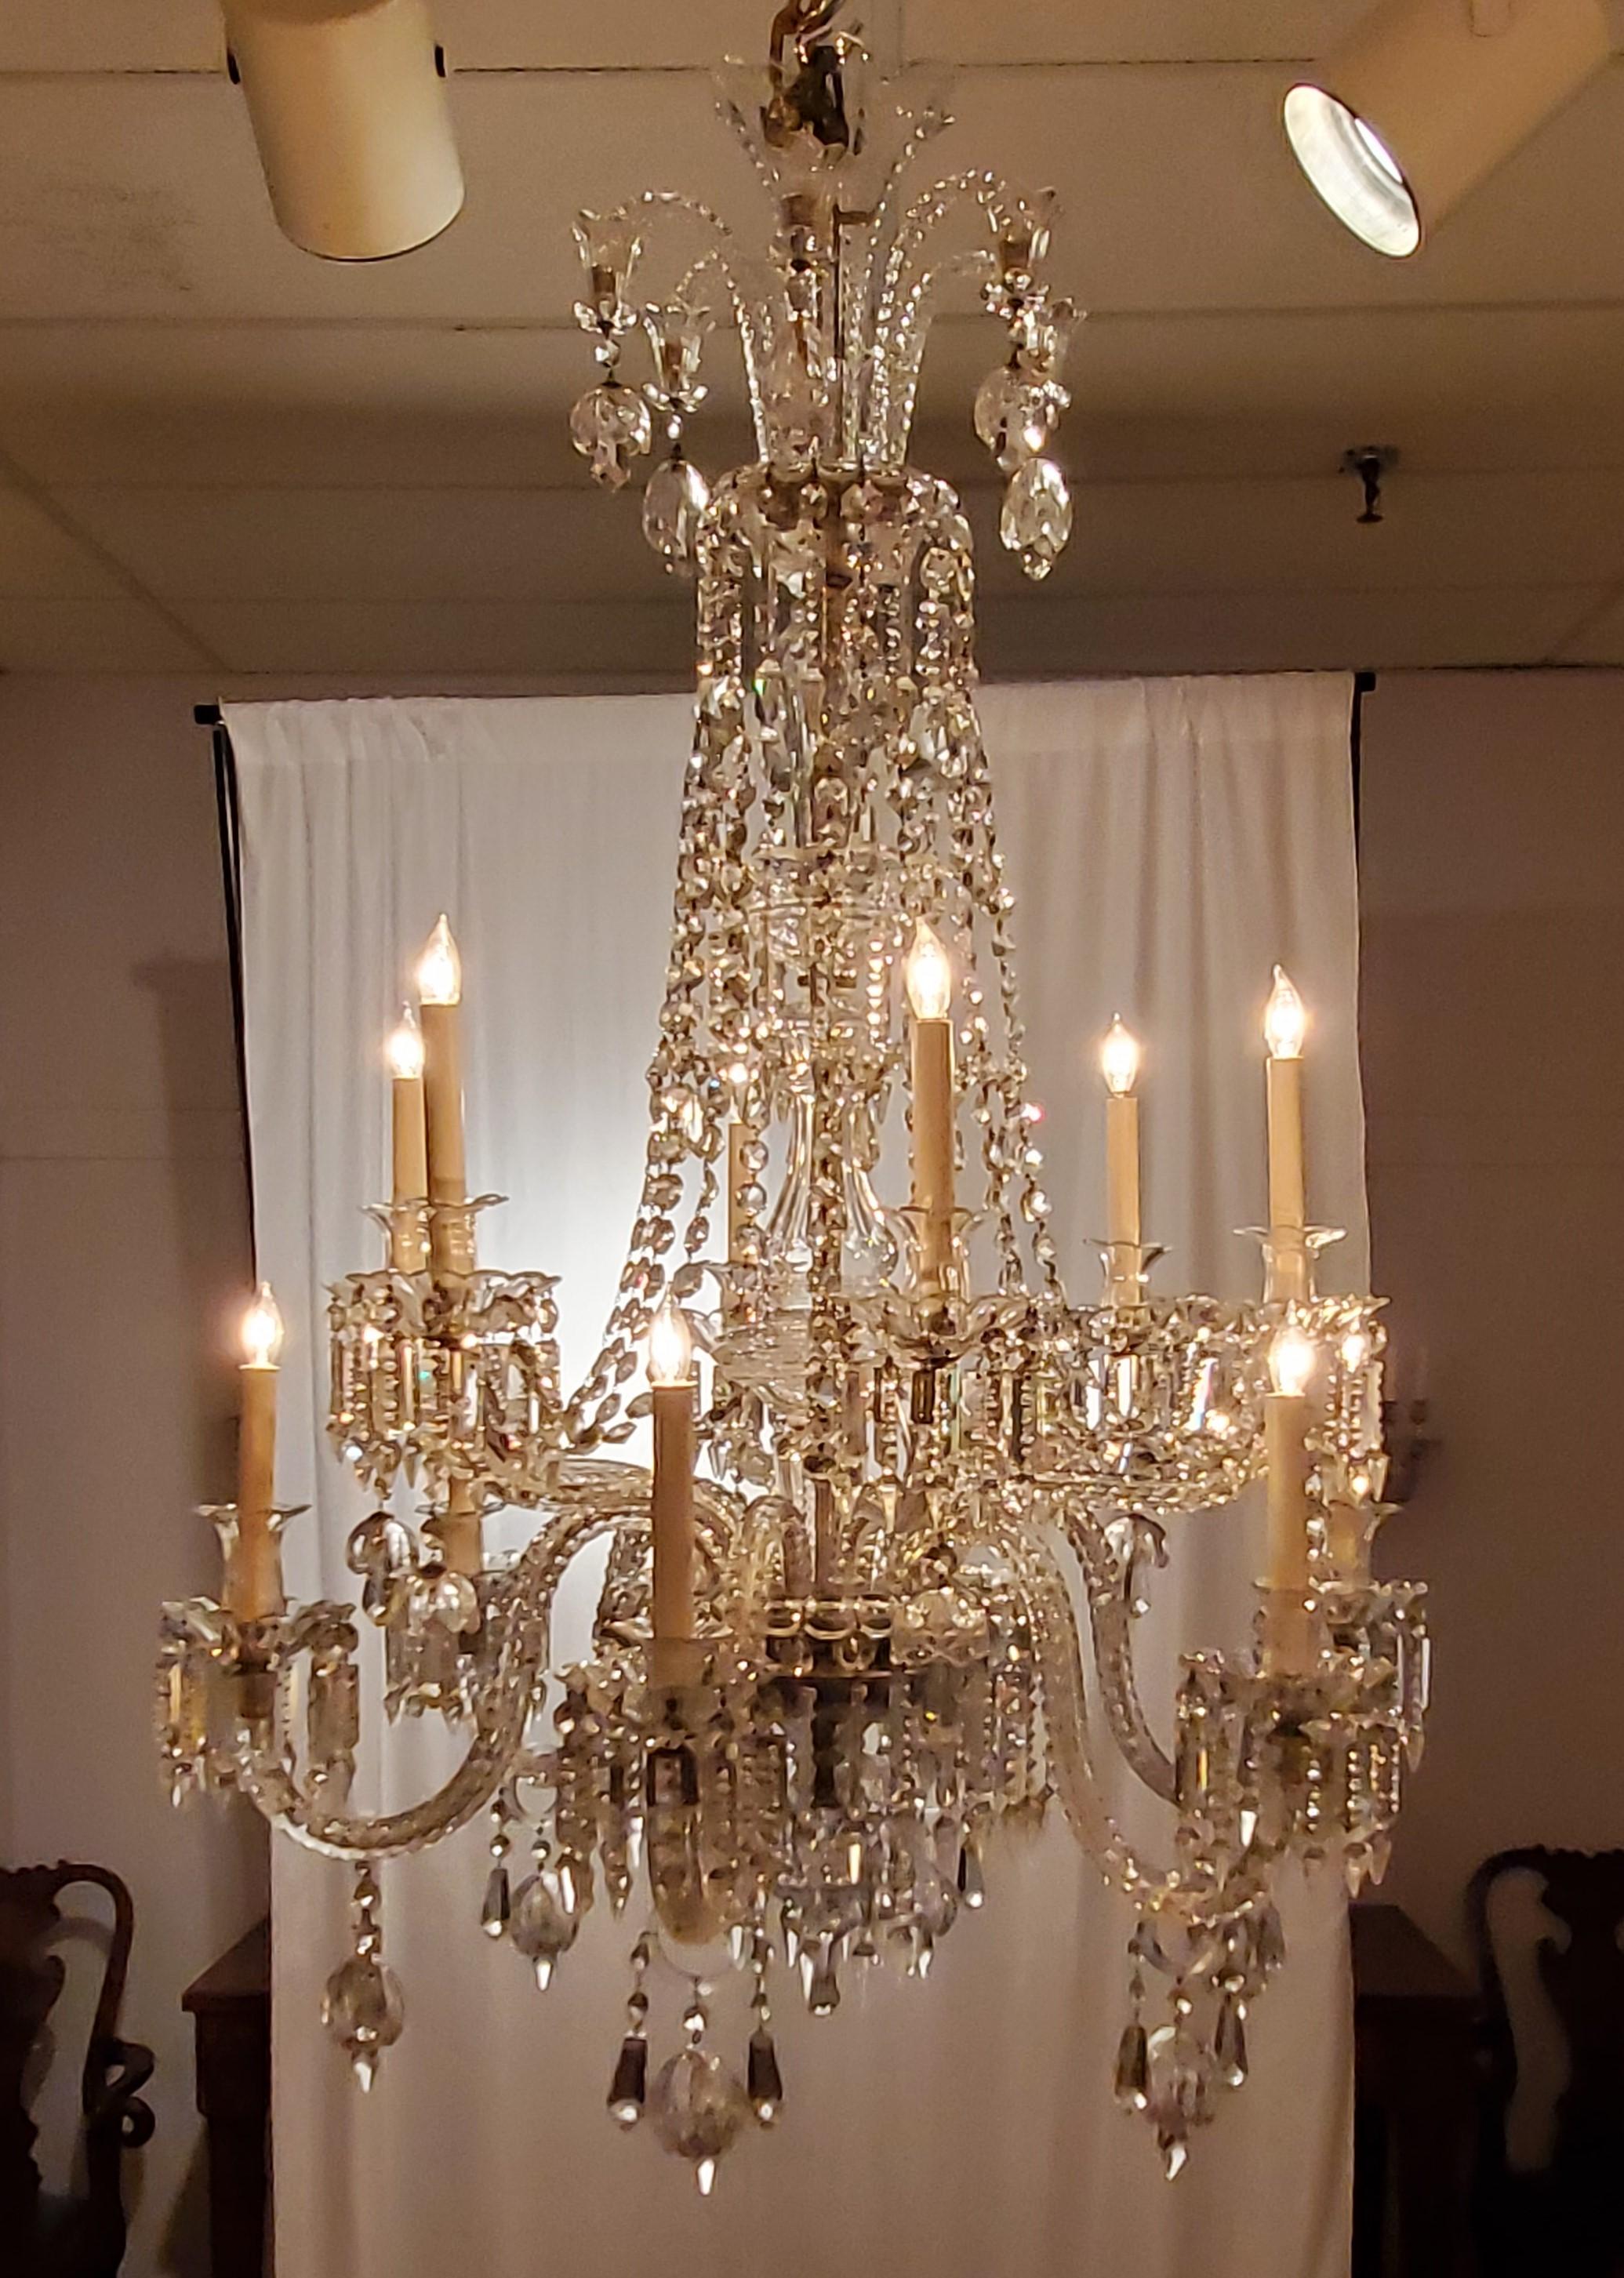 Magnificent antique Irish lead crystal 19th century chandelier. This is a beautiful, beautiful chandelier.